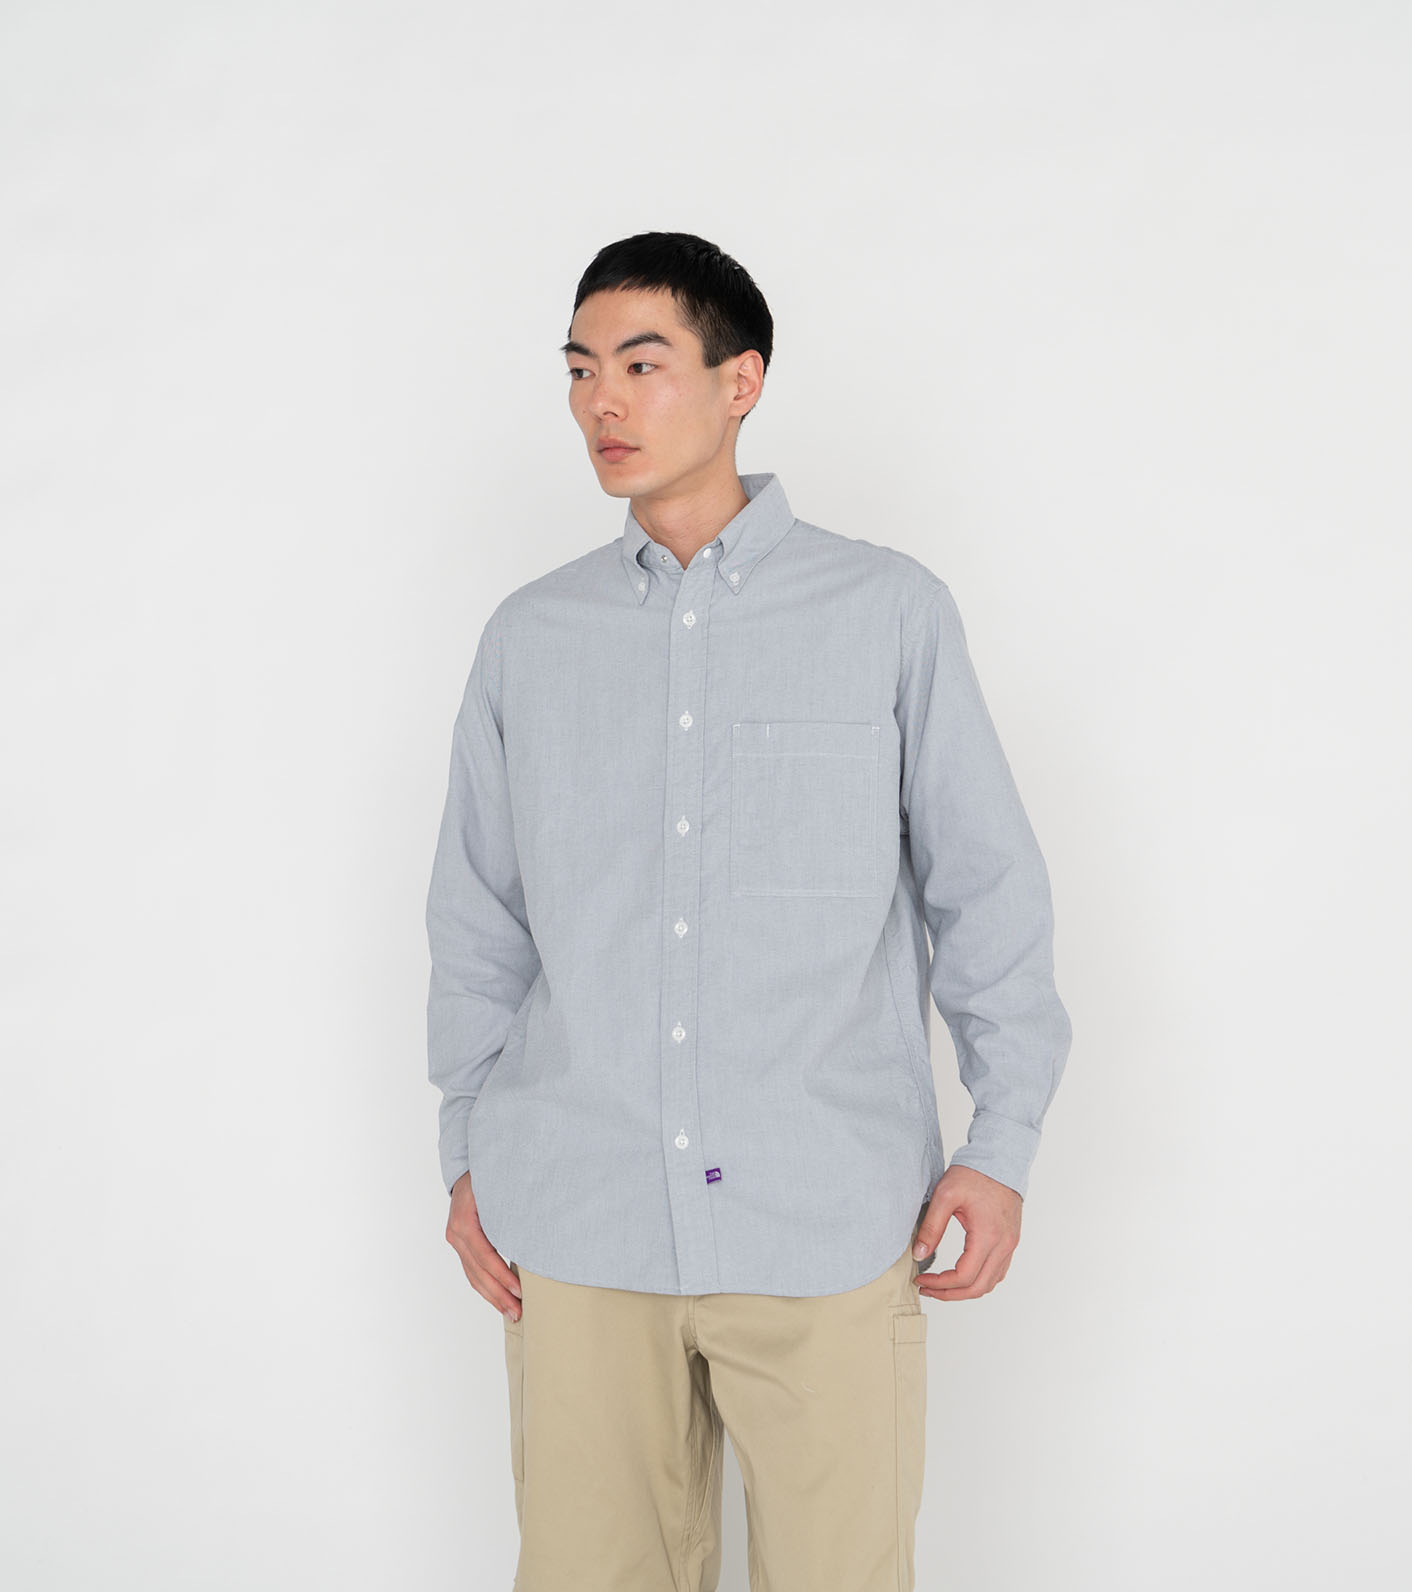 09113● THE NORTH FACE PURPLE LABEL SHIRT